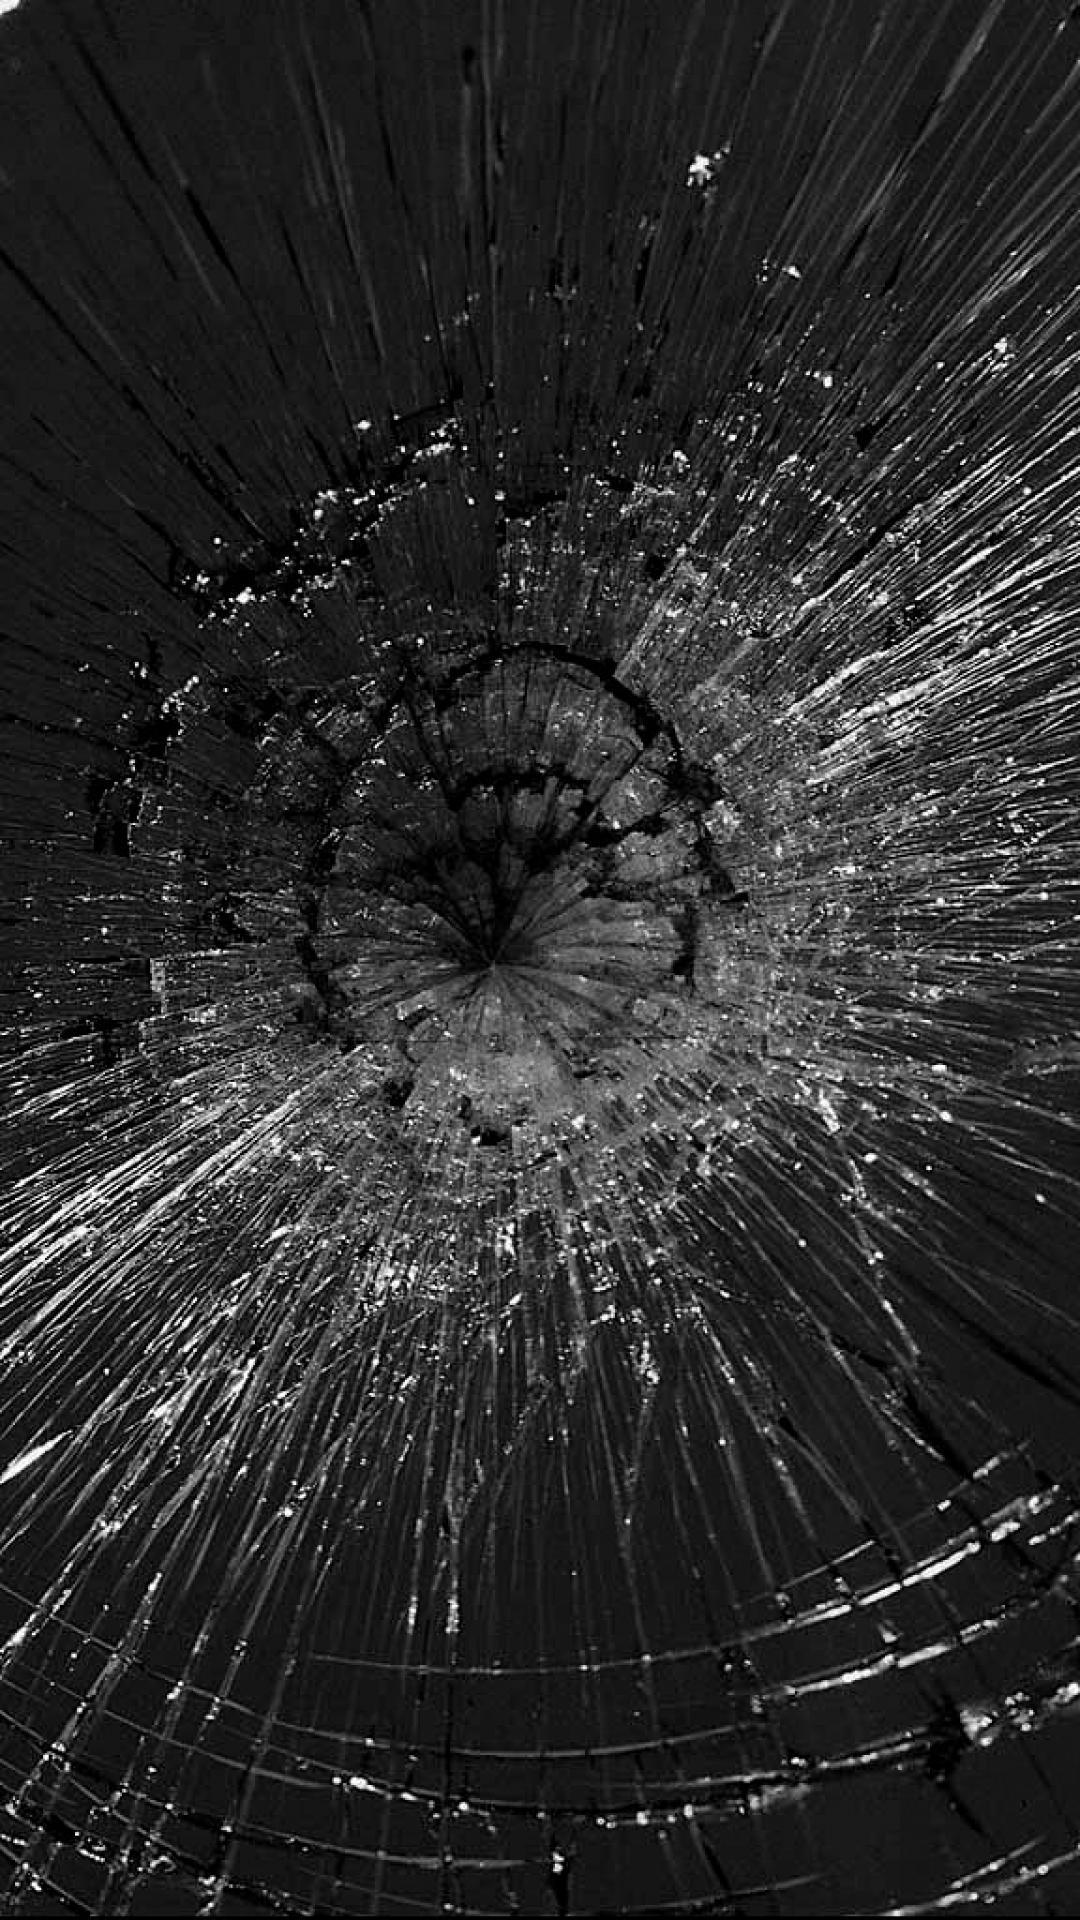 Cracked Phone Screen Wallpaper, image collections of wallpaper